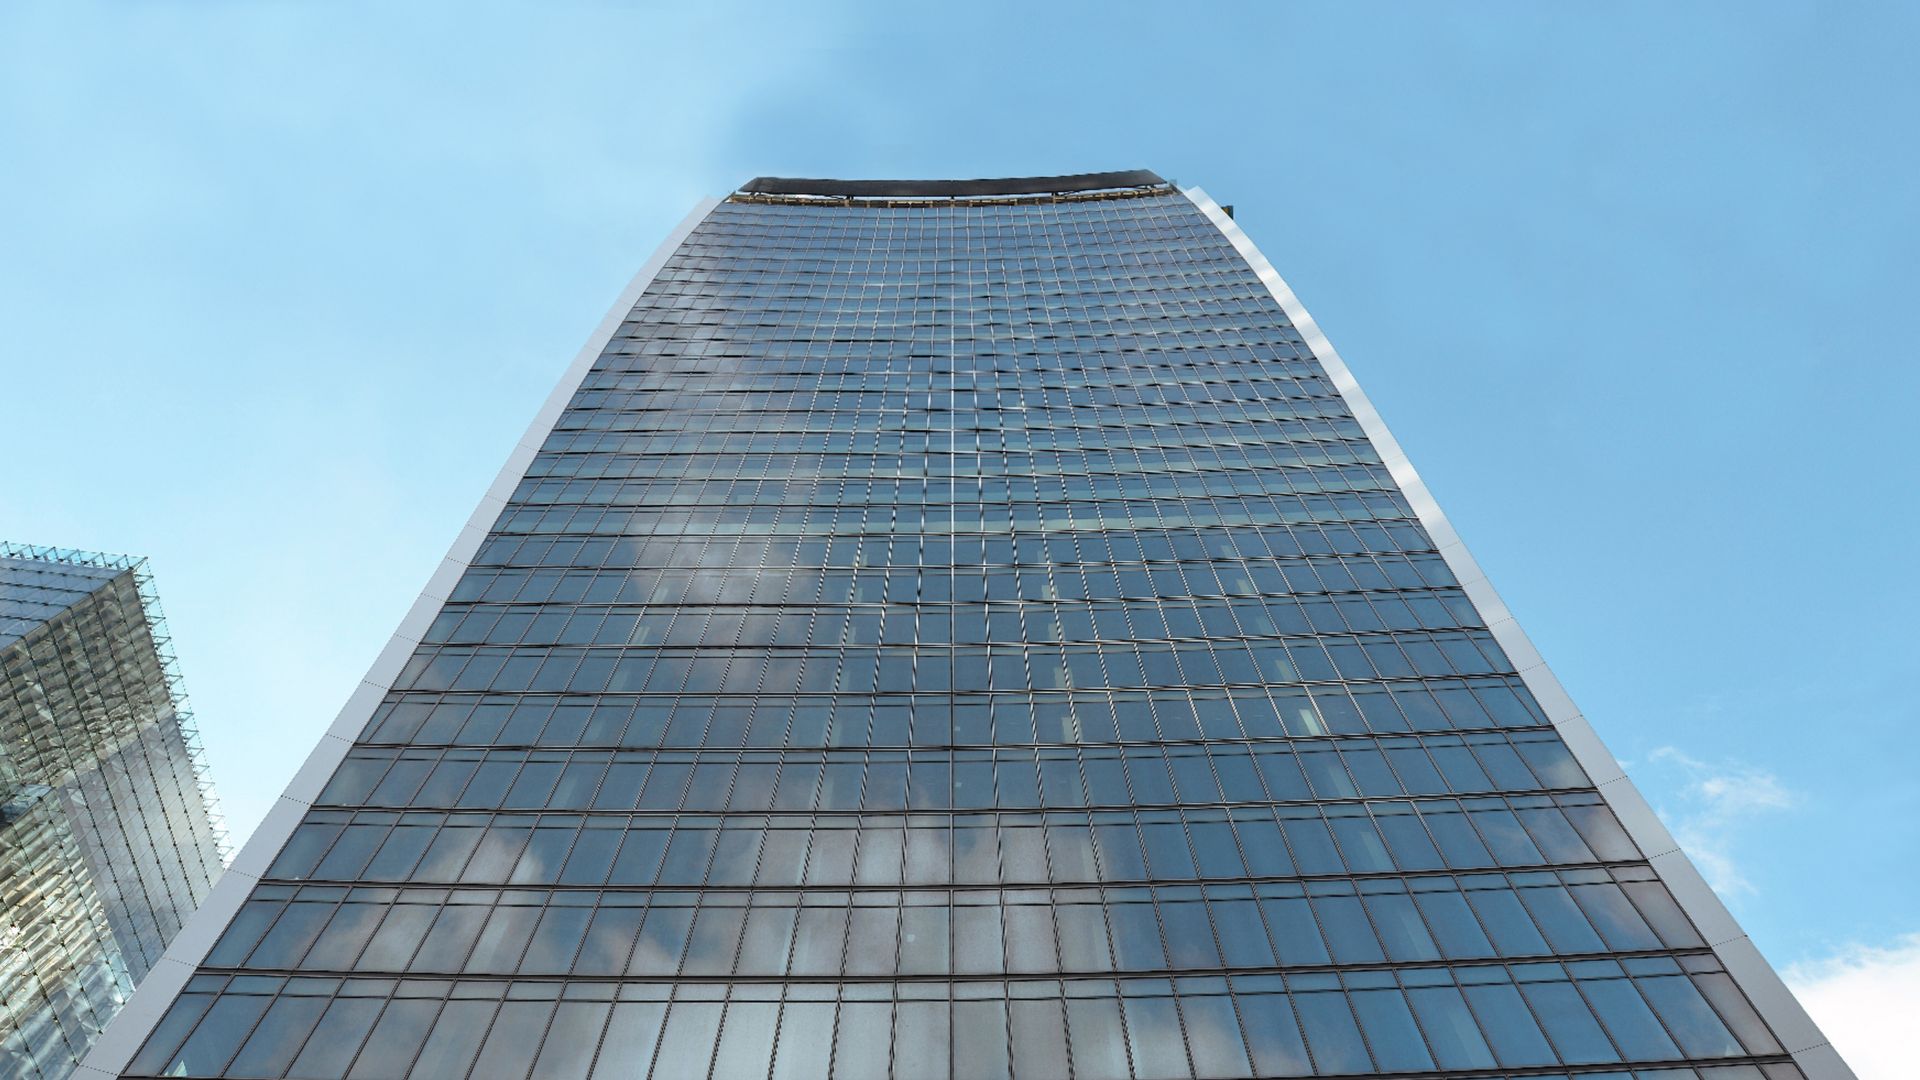 High-rise building with glass facade with cloud reflection